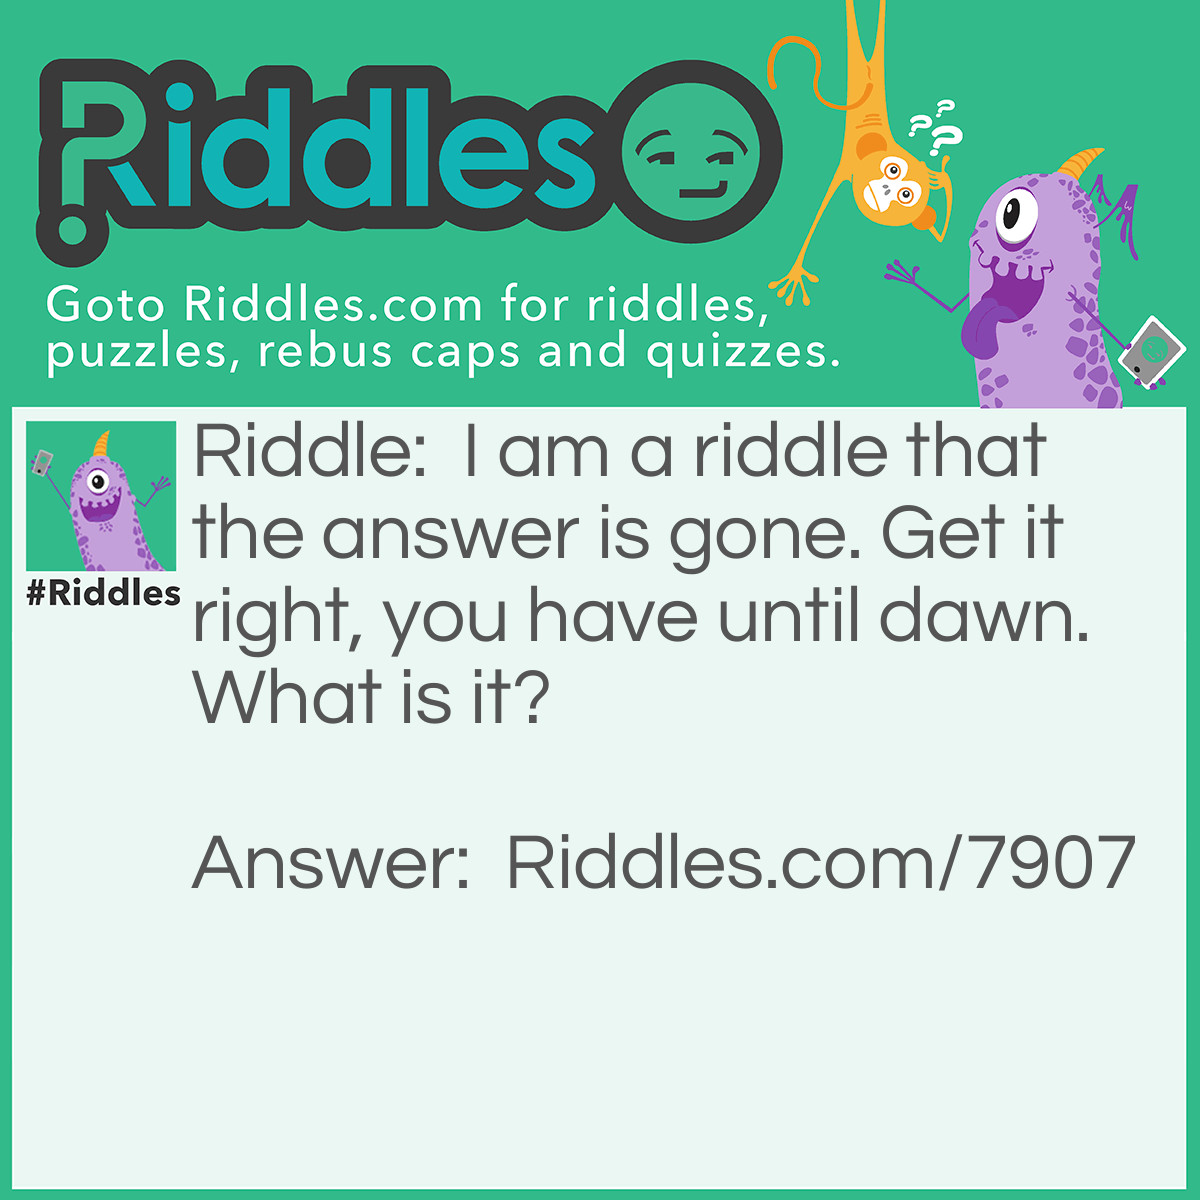 Riddle: I am a riddle that the answer is gone. Get it right, you have until dawn. What is it? Answer: Gone.